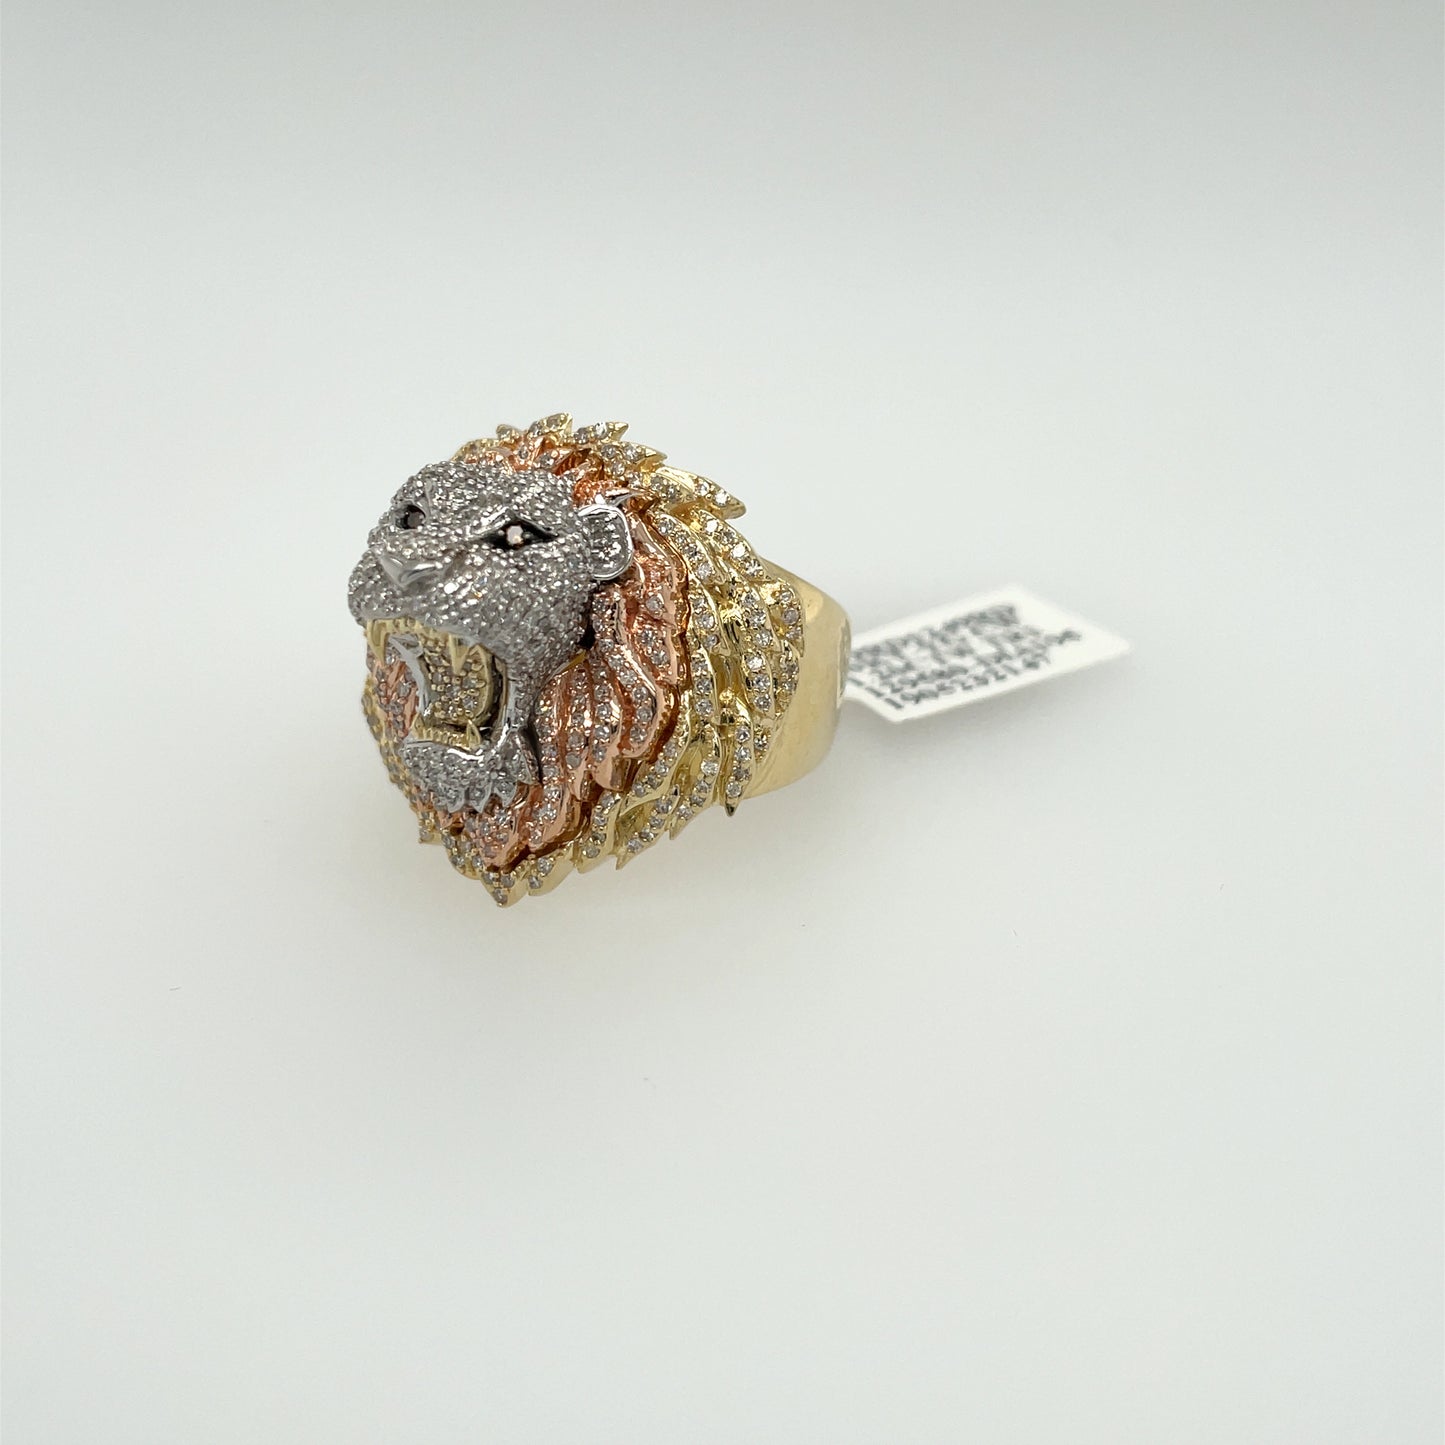 Diamond Lion Head Ring - 1.20 Carats in 10KT 3-Tone Gold